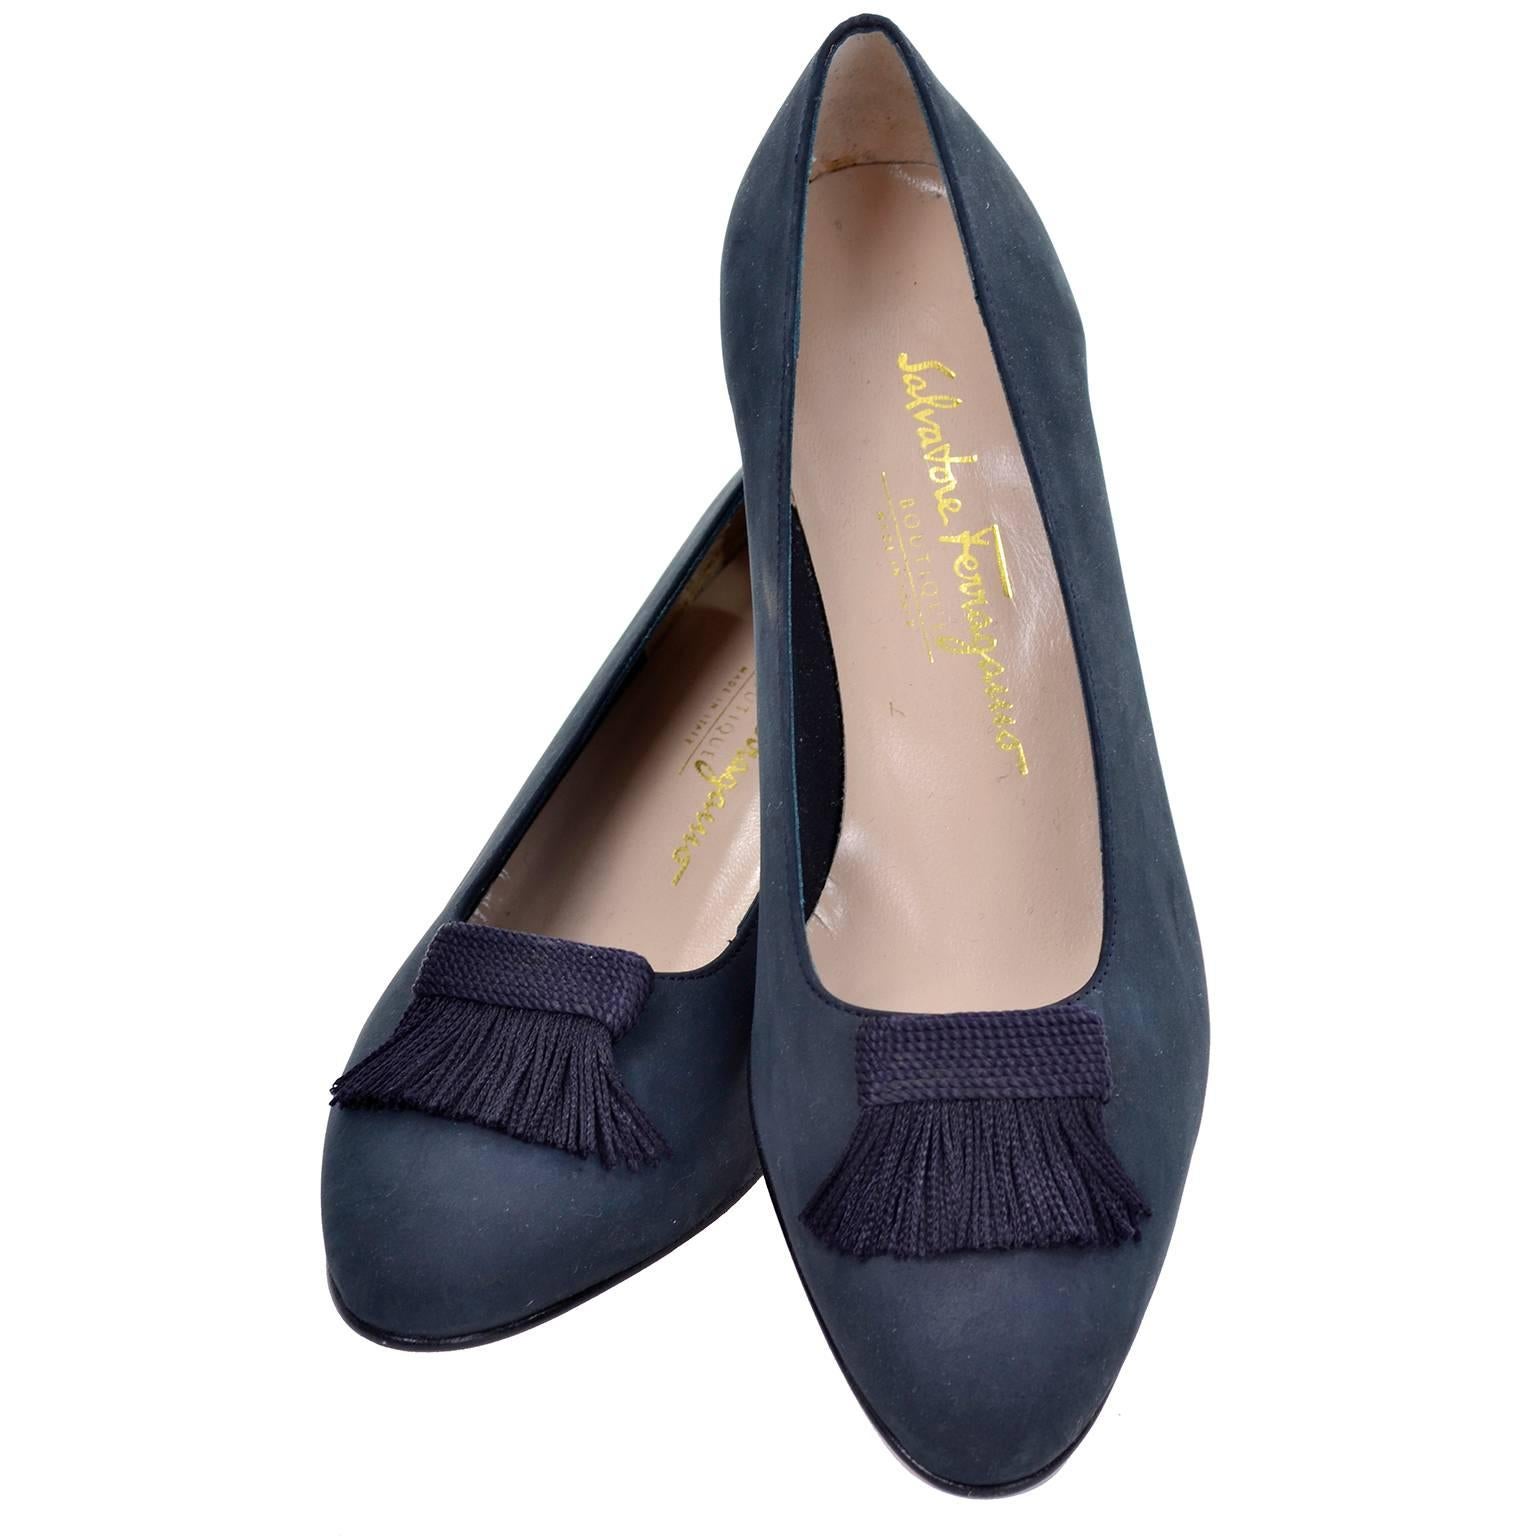 New Vintage Ferragamo Shoes in Navy Blue Suede with Fringed